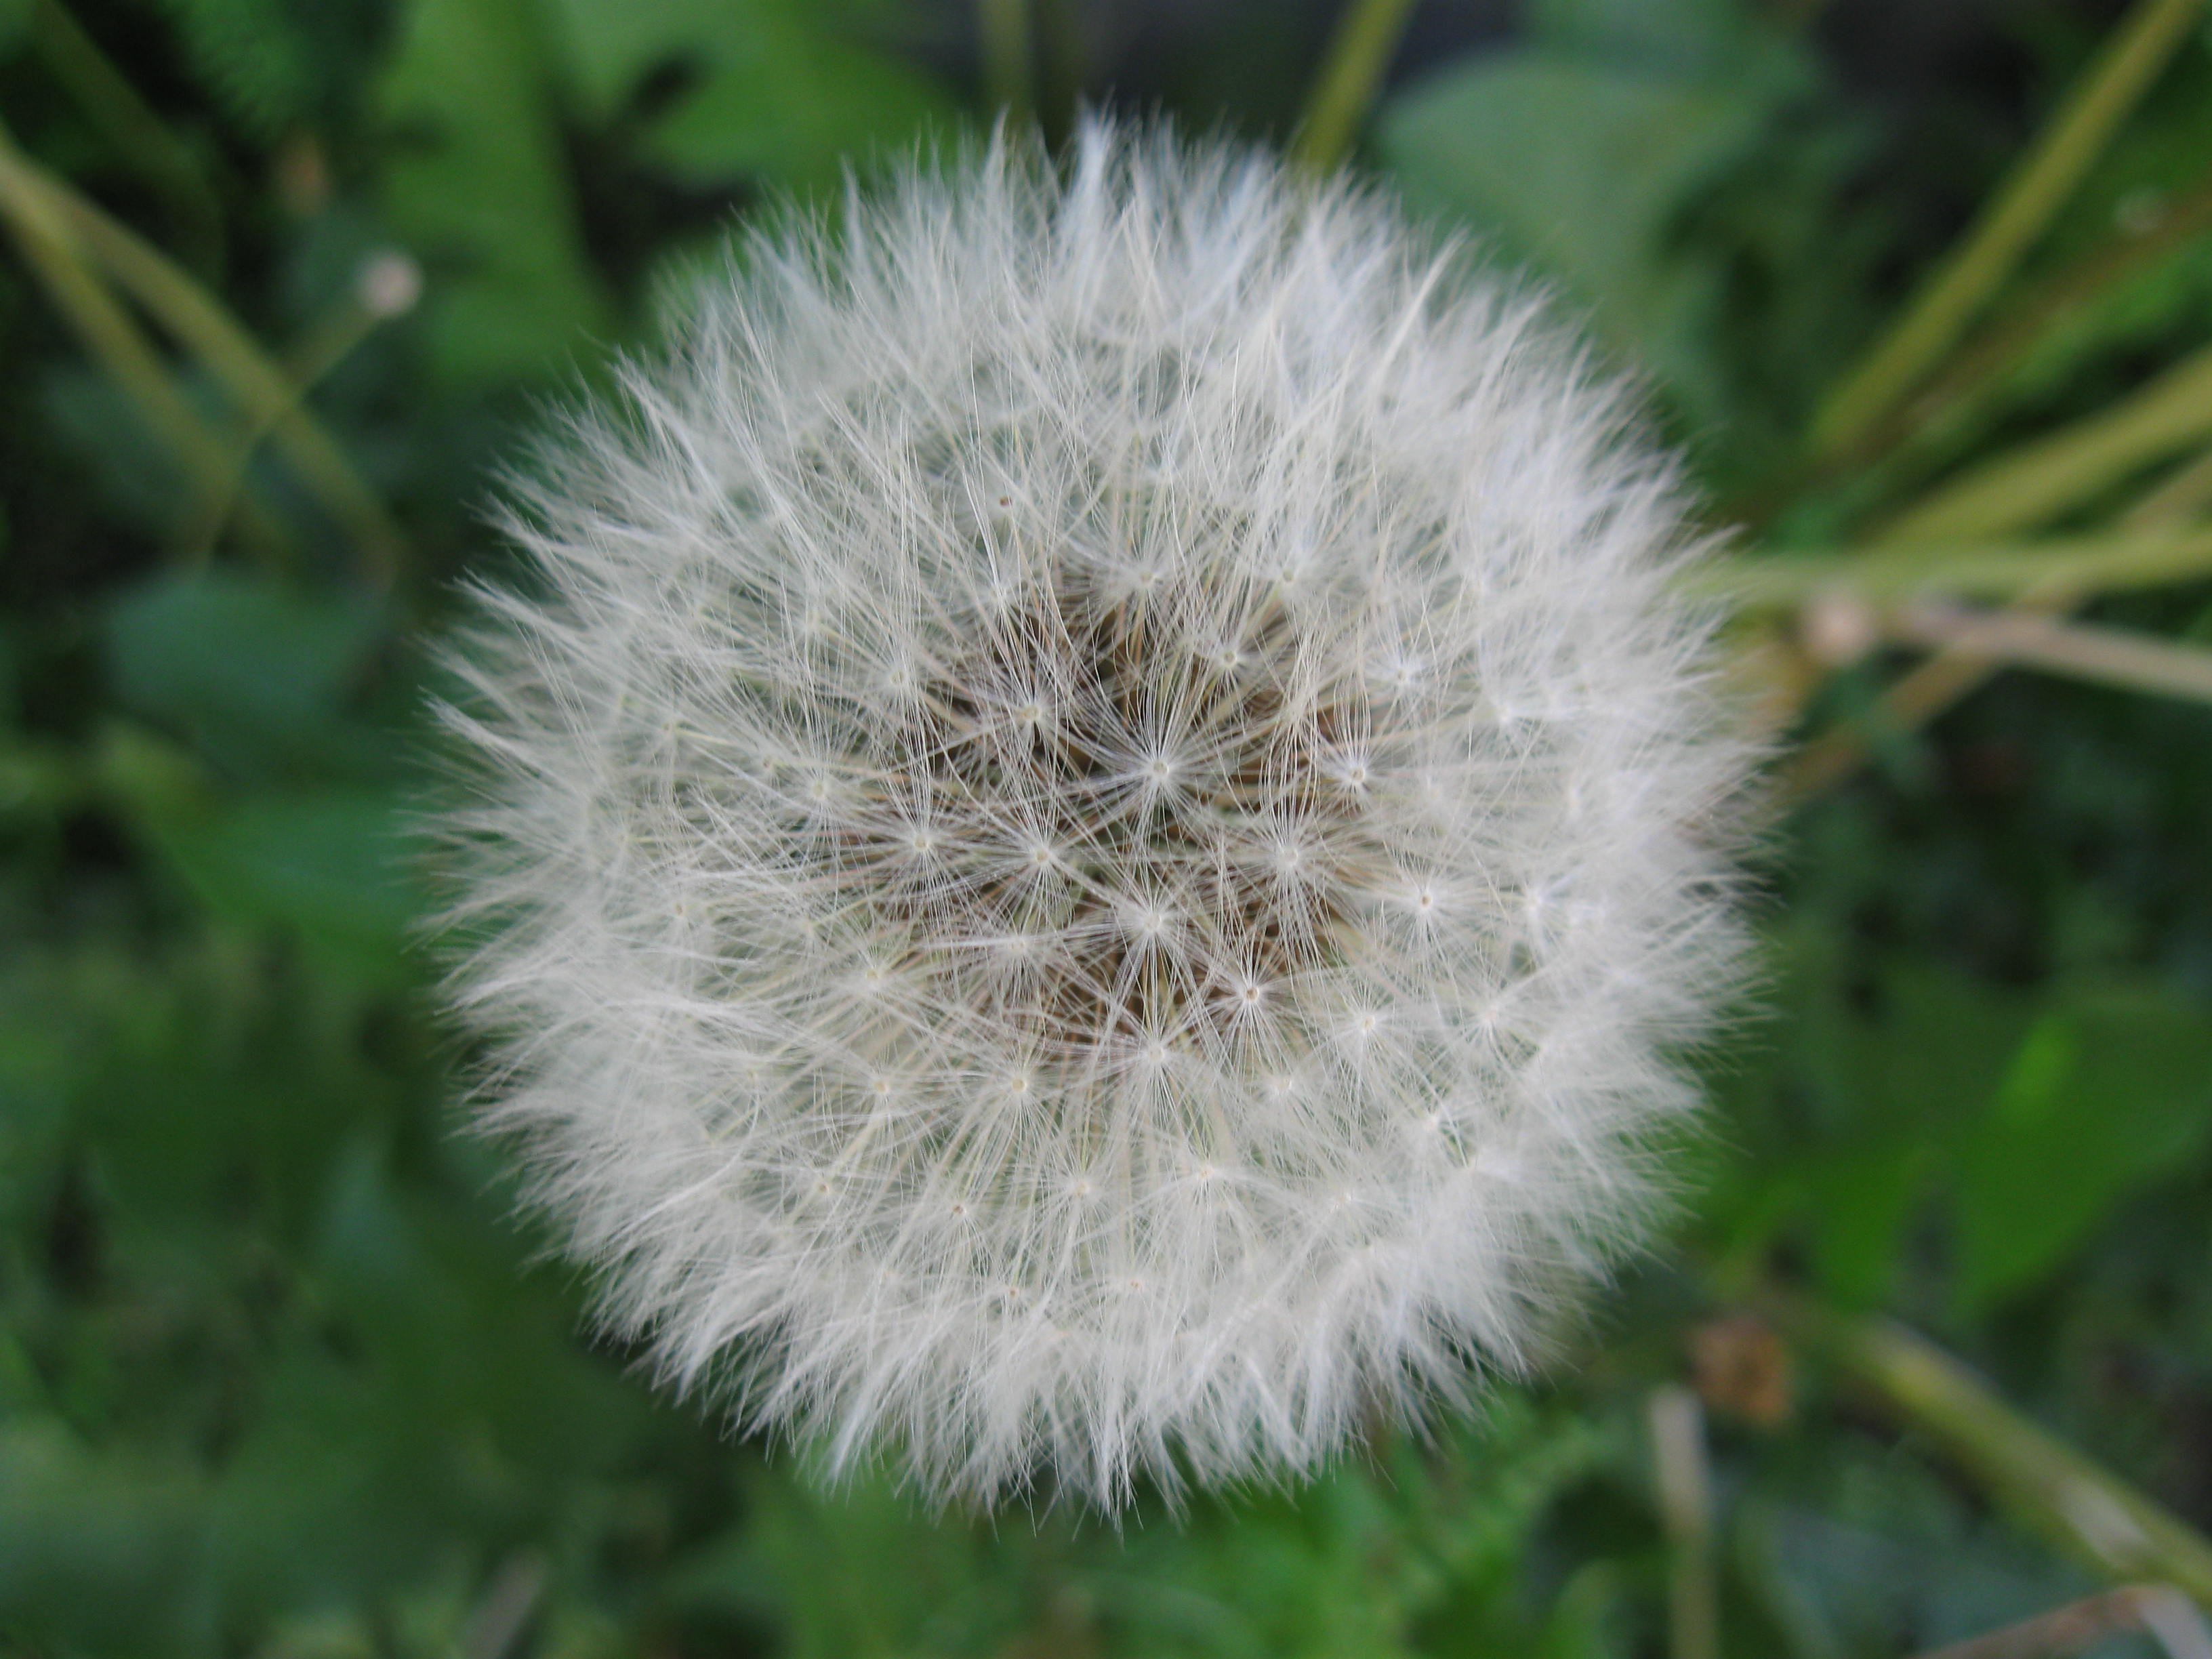 File:Dandelion close up view.jpg - Wikimedia Commons